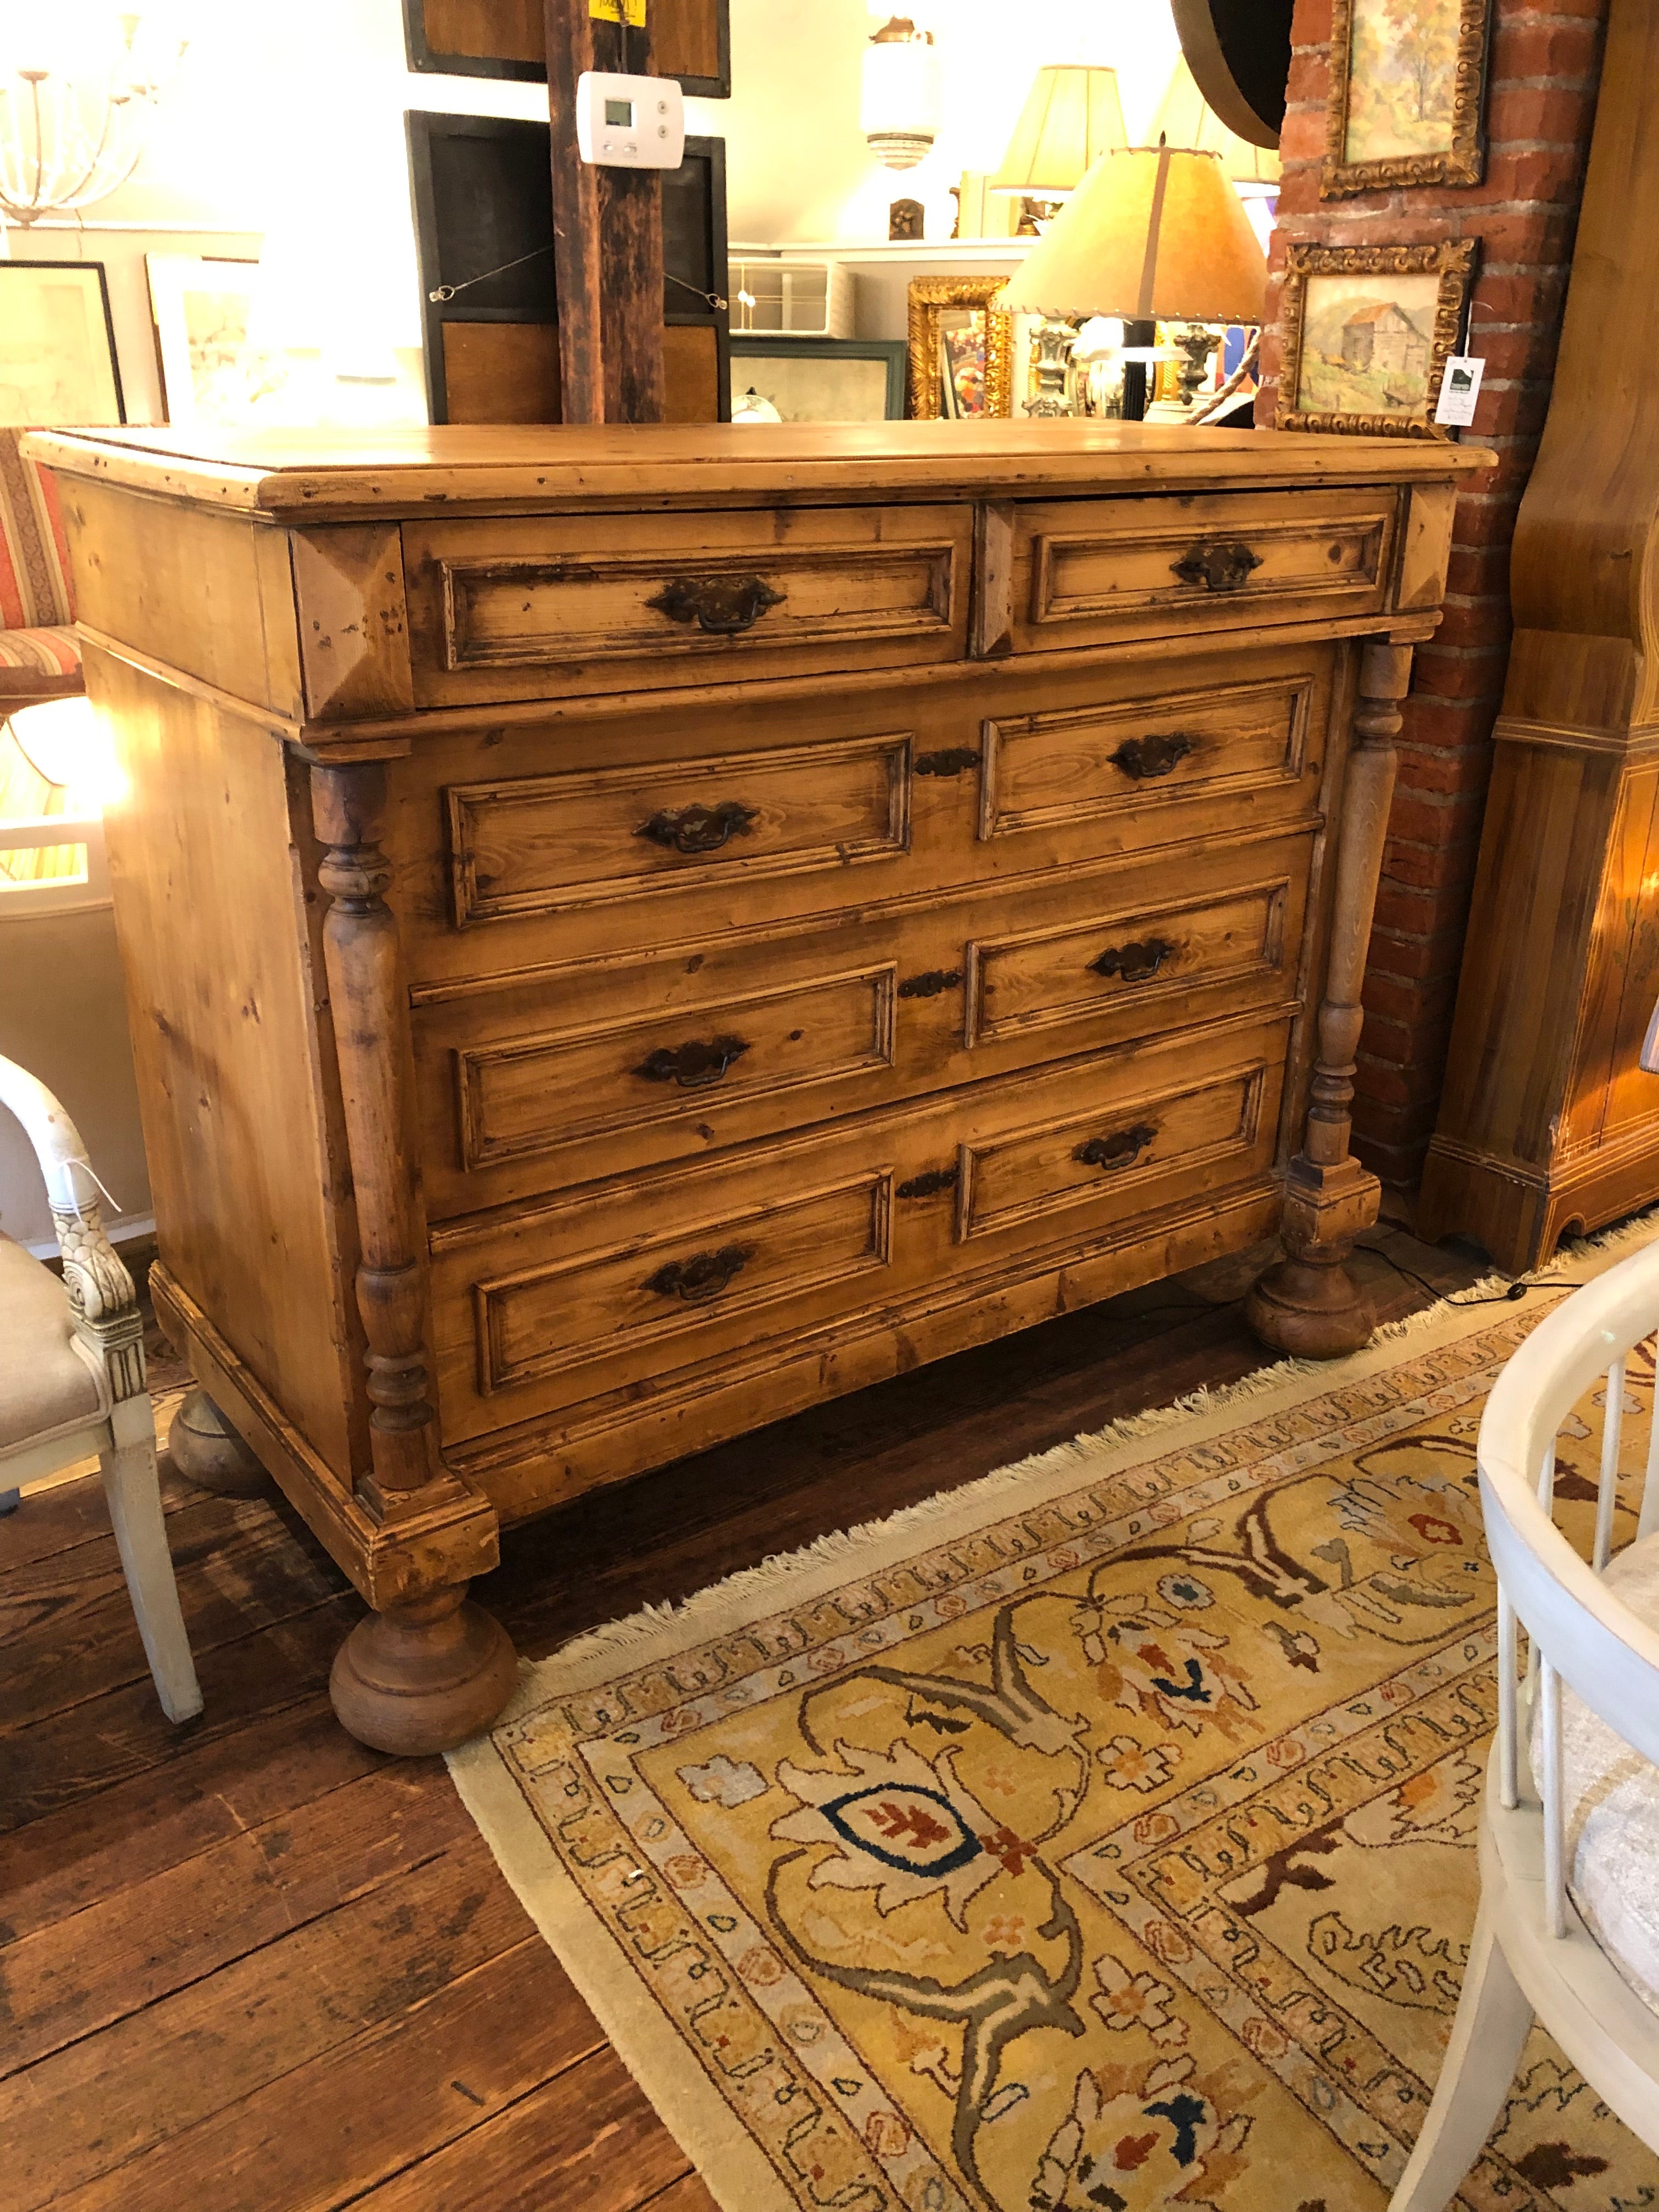 A rare and impressive carved natural pine chest of drawers having two smaller drawers on top of 3 very large drawers, original matte bronze finish hardware, and fabulously massive bun feet. Beautiful grain and honey warm weathered patina. 